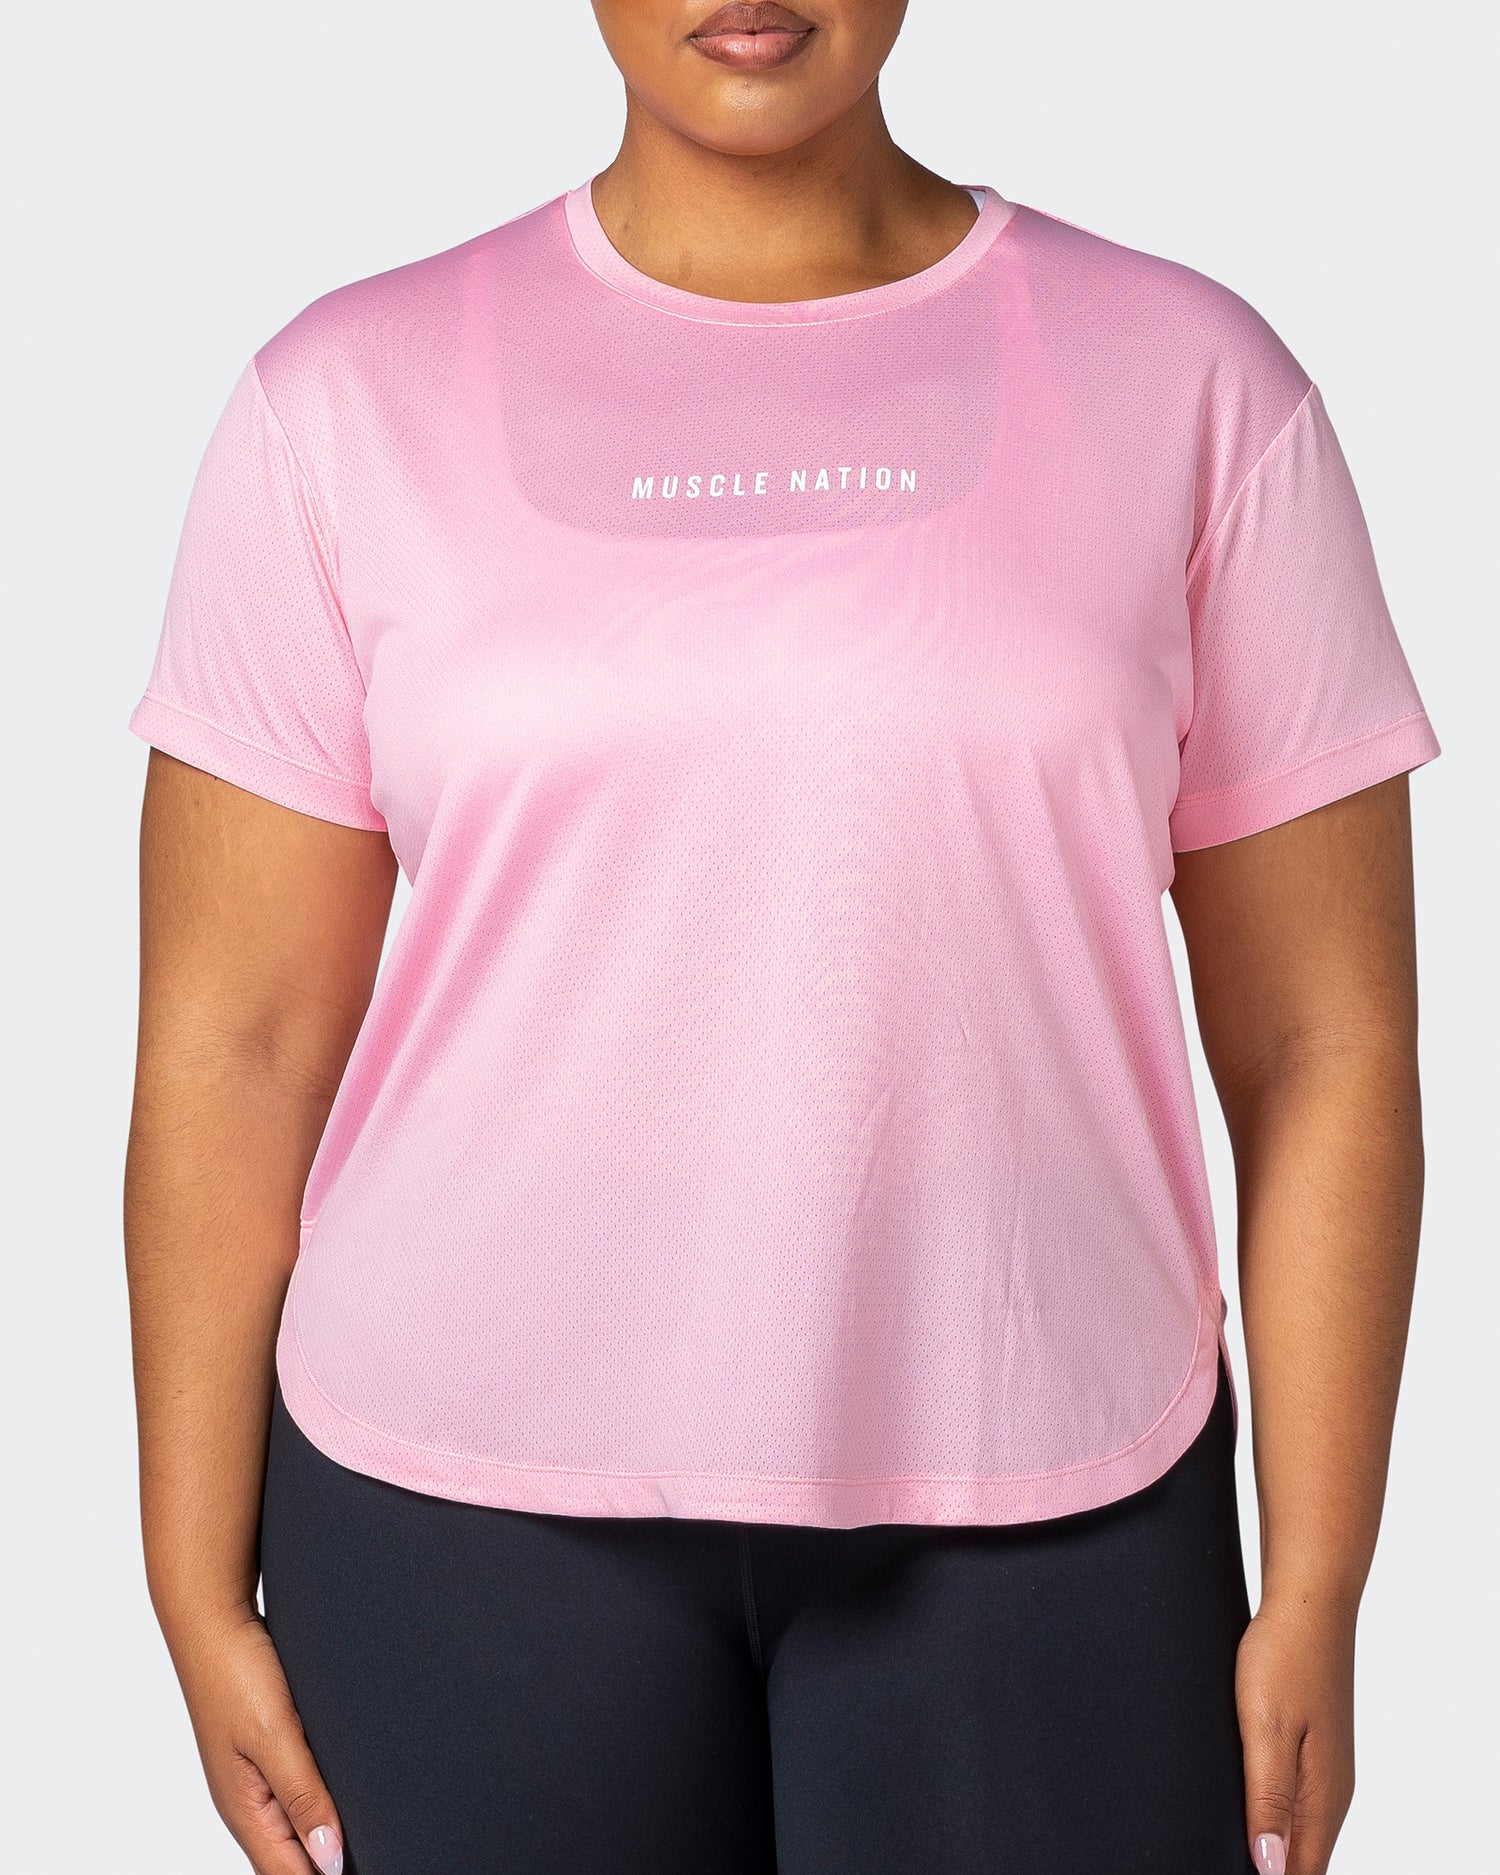 Limitless Training Tee - Strawberry Pink